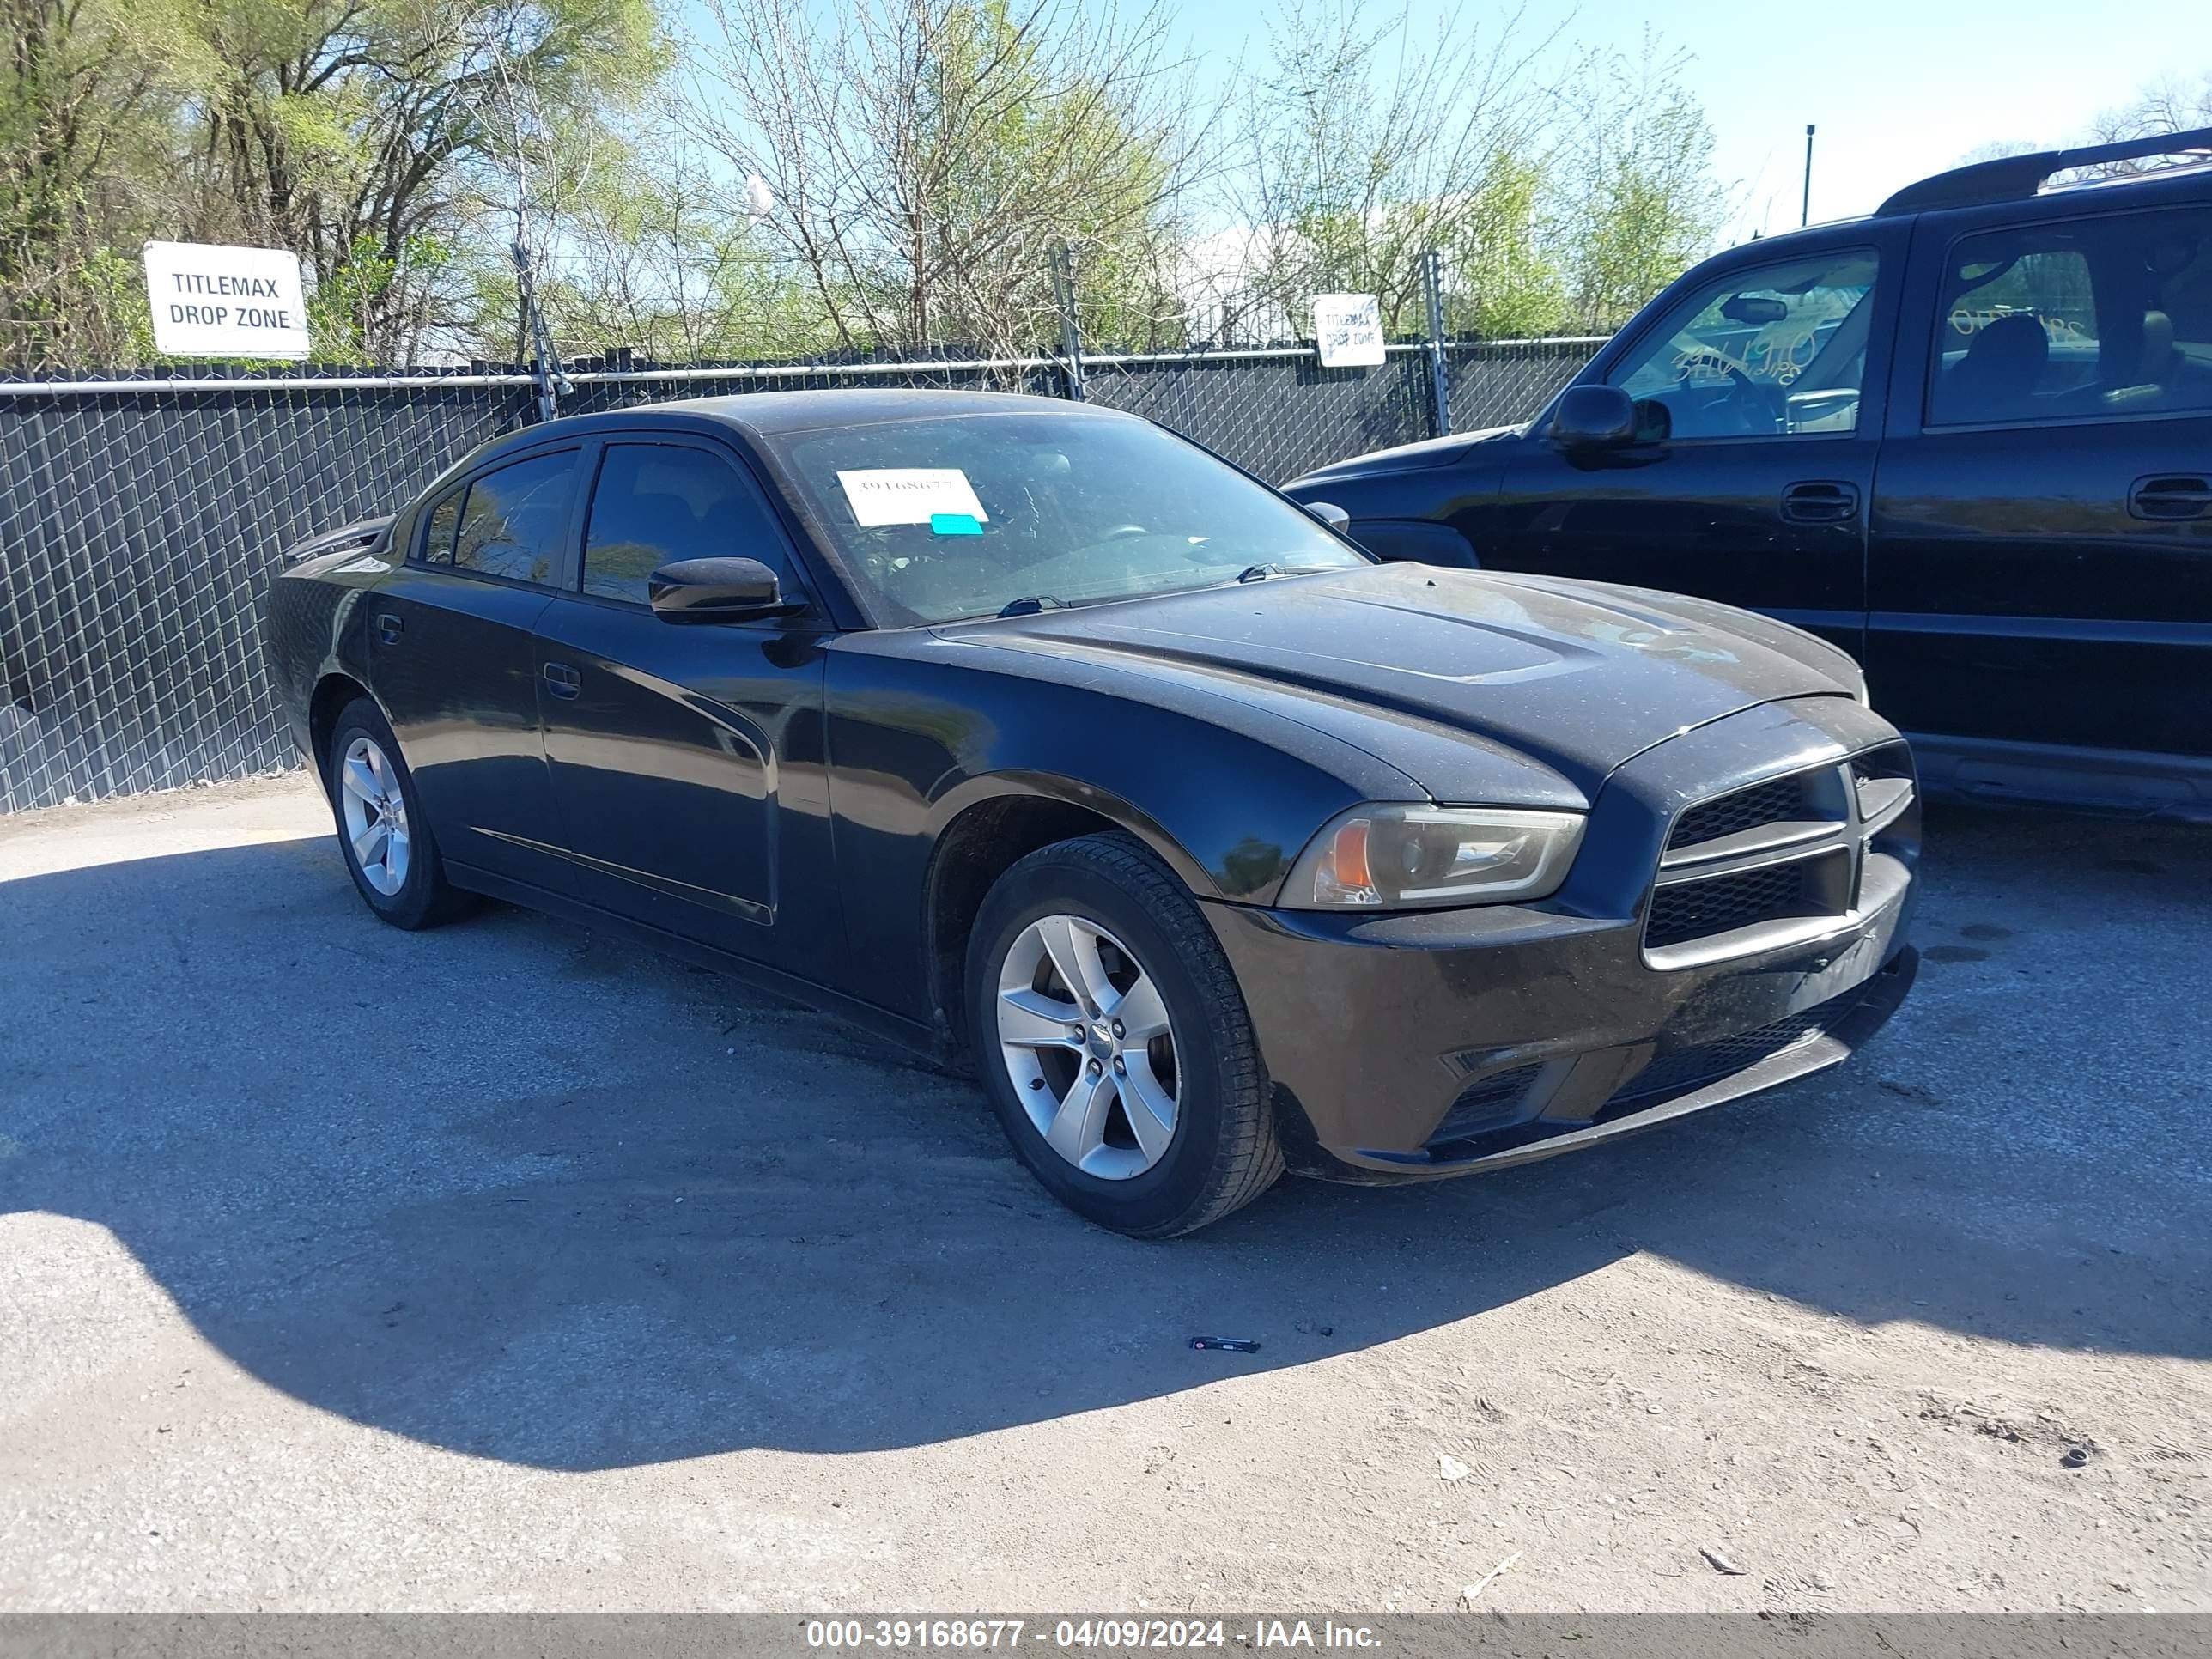 VIN: 2B3CL3CG6BH545103 - dodge charger